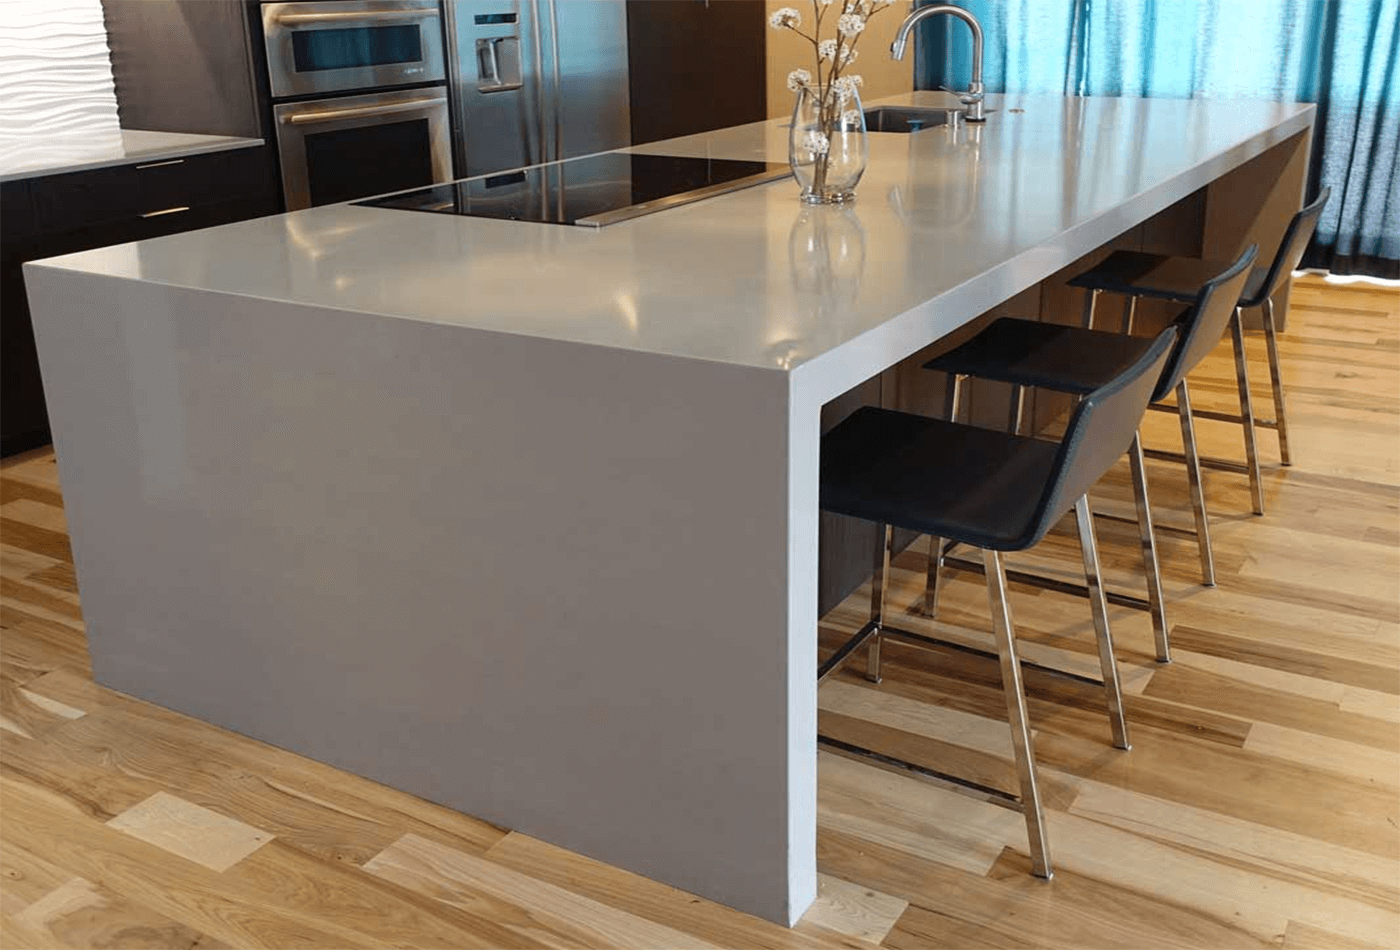 What Are Some Things You Shouldn't Use On Quartz Countertops in the Home